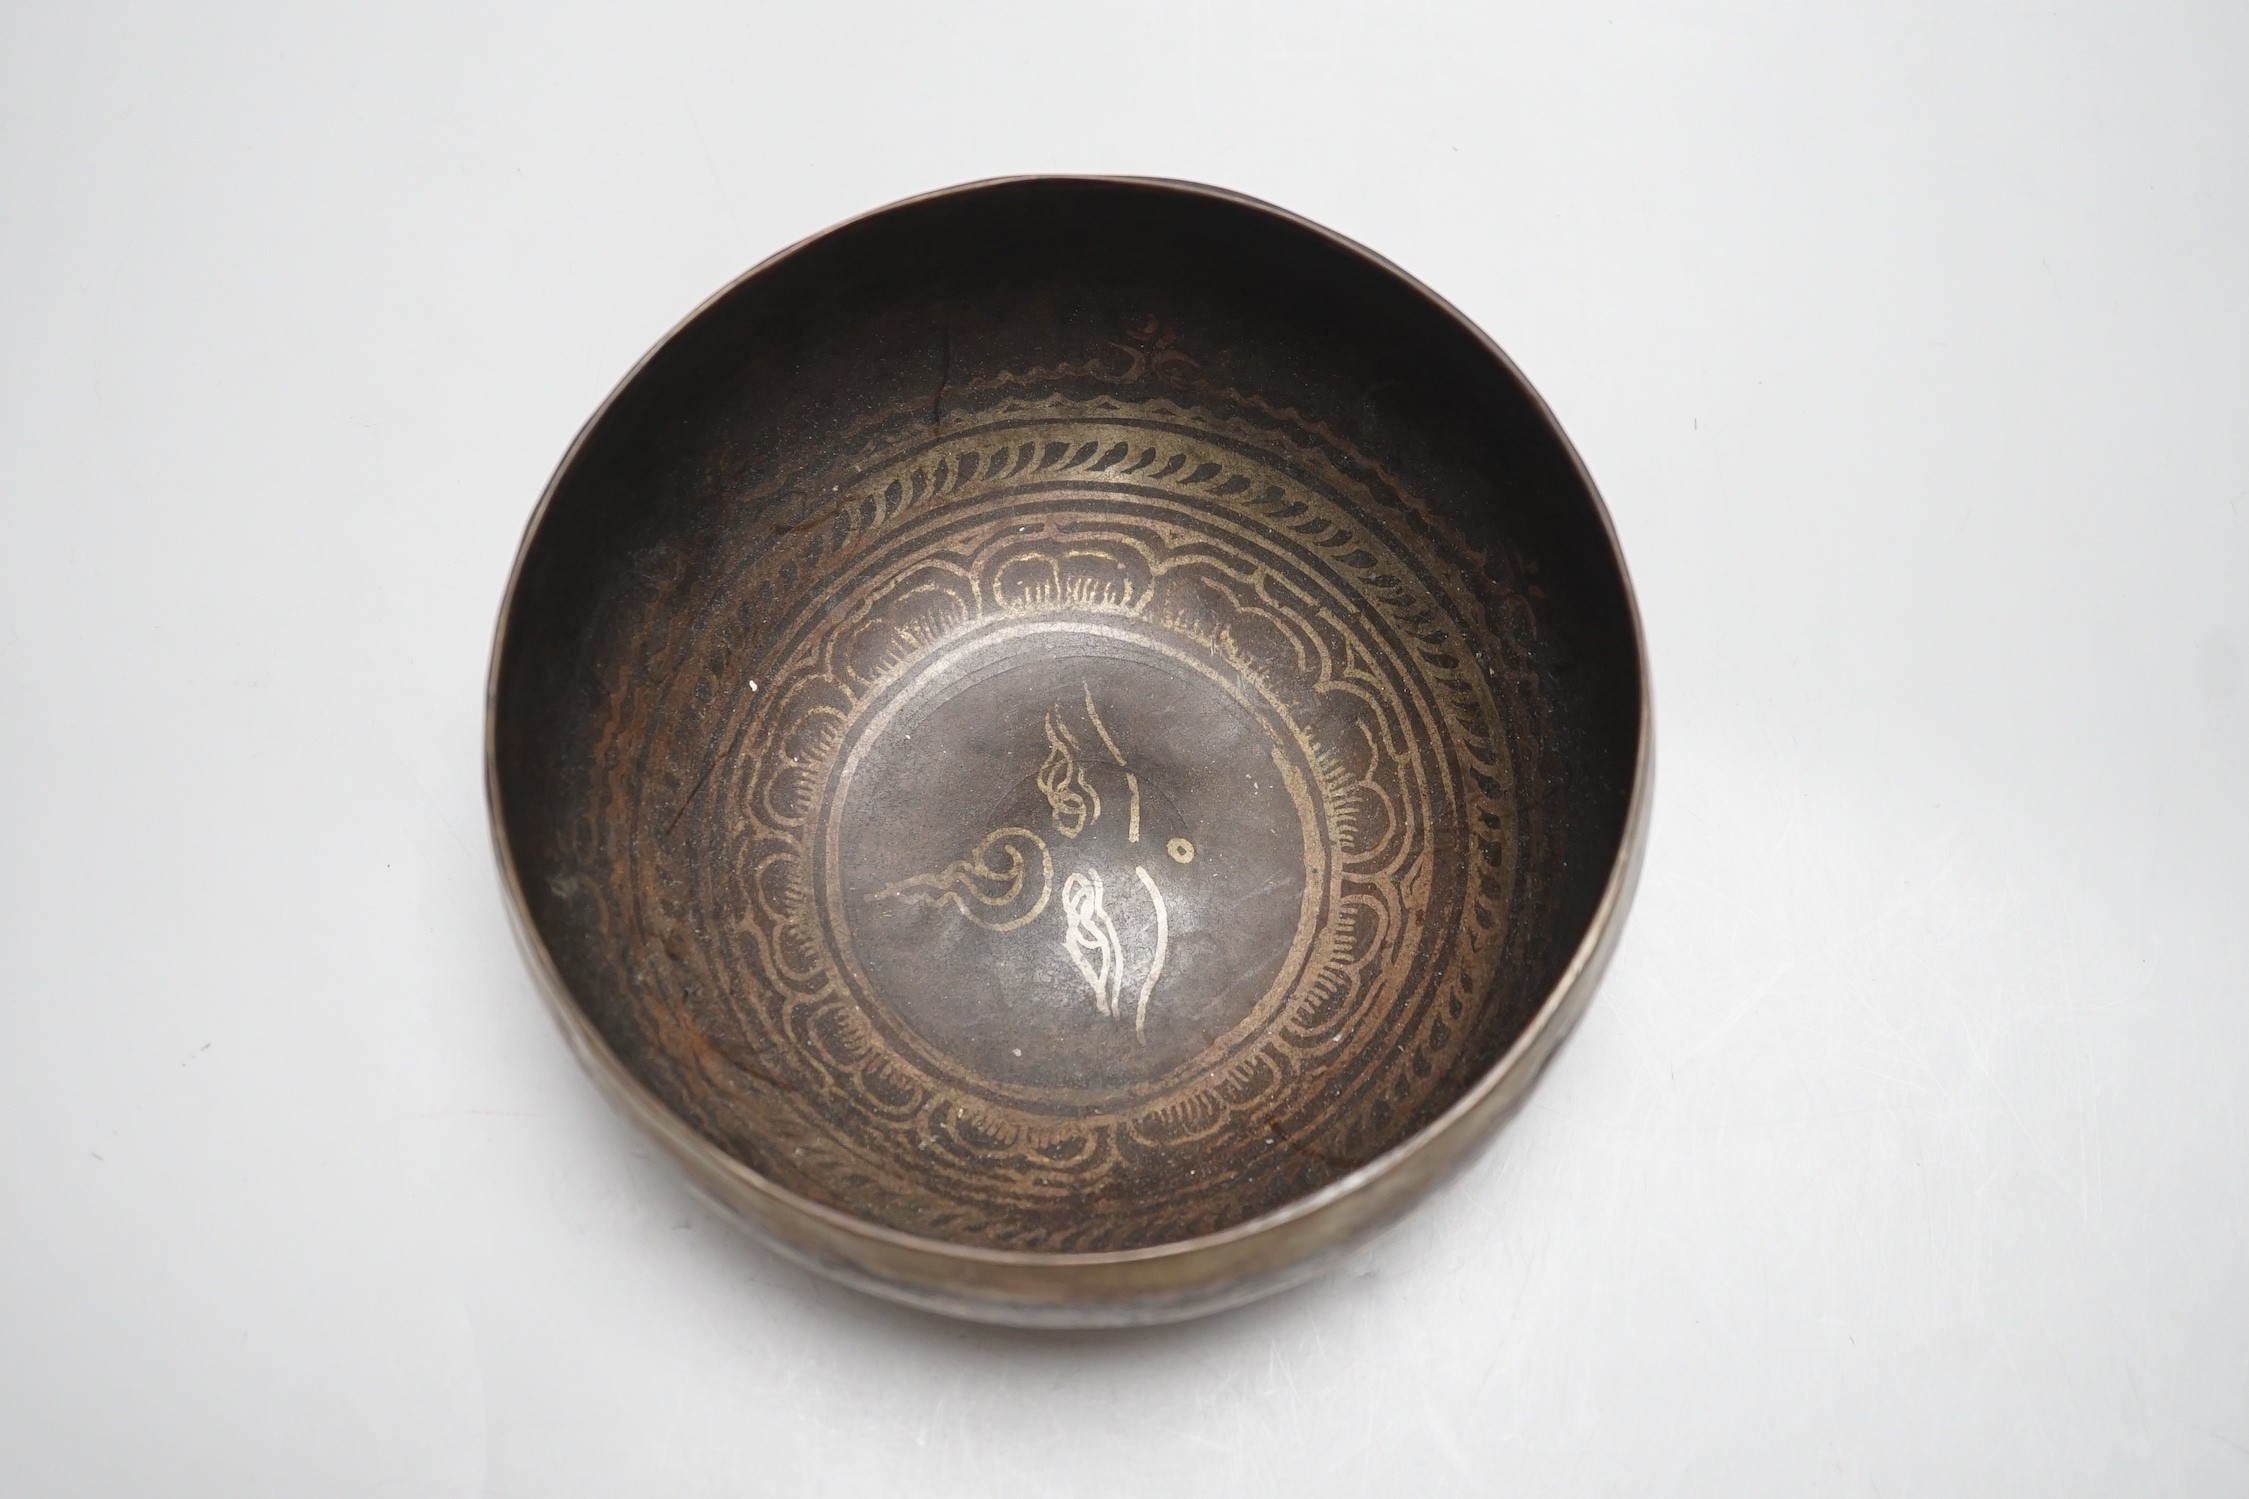 A bronze Nepalese temple bowl decorated with script, 18cm diameter